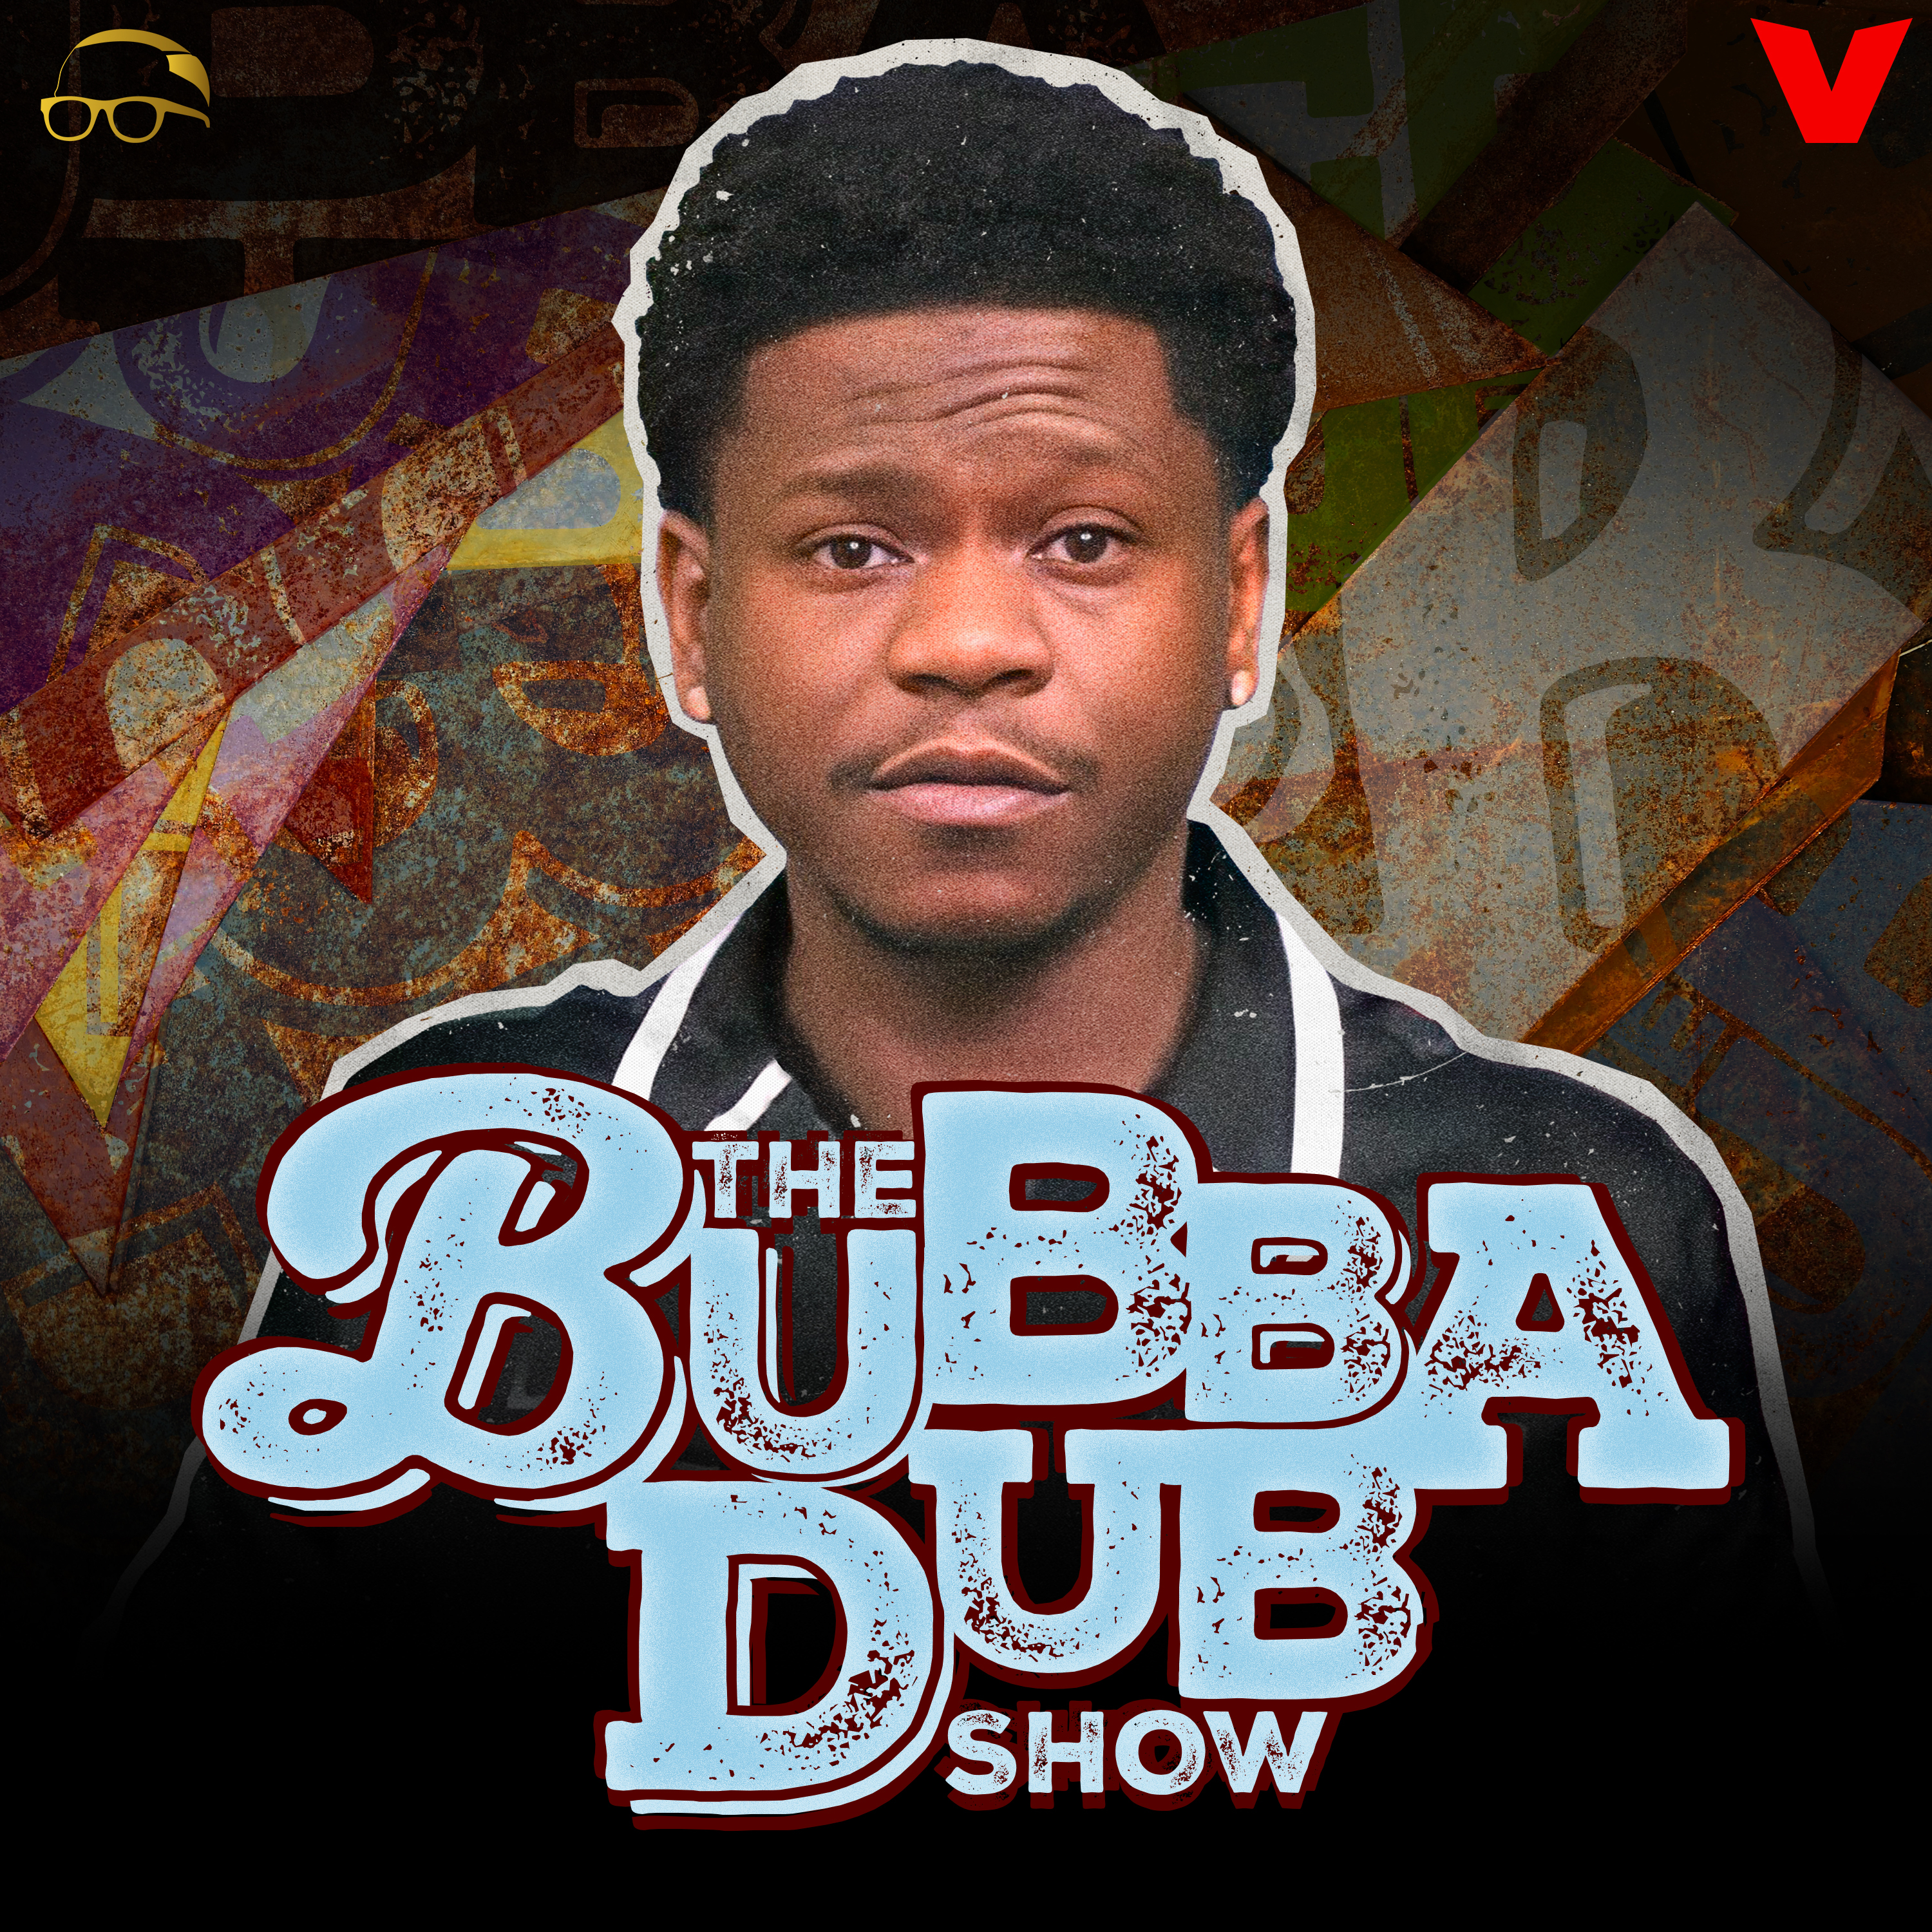 The Bubba Dub Show - Nobody Is Stopping The Celtics, Knicks Take Commanding Lead, Can The Mavs Get Even With OKC?